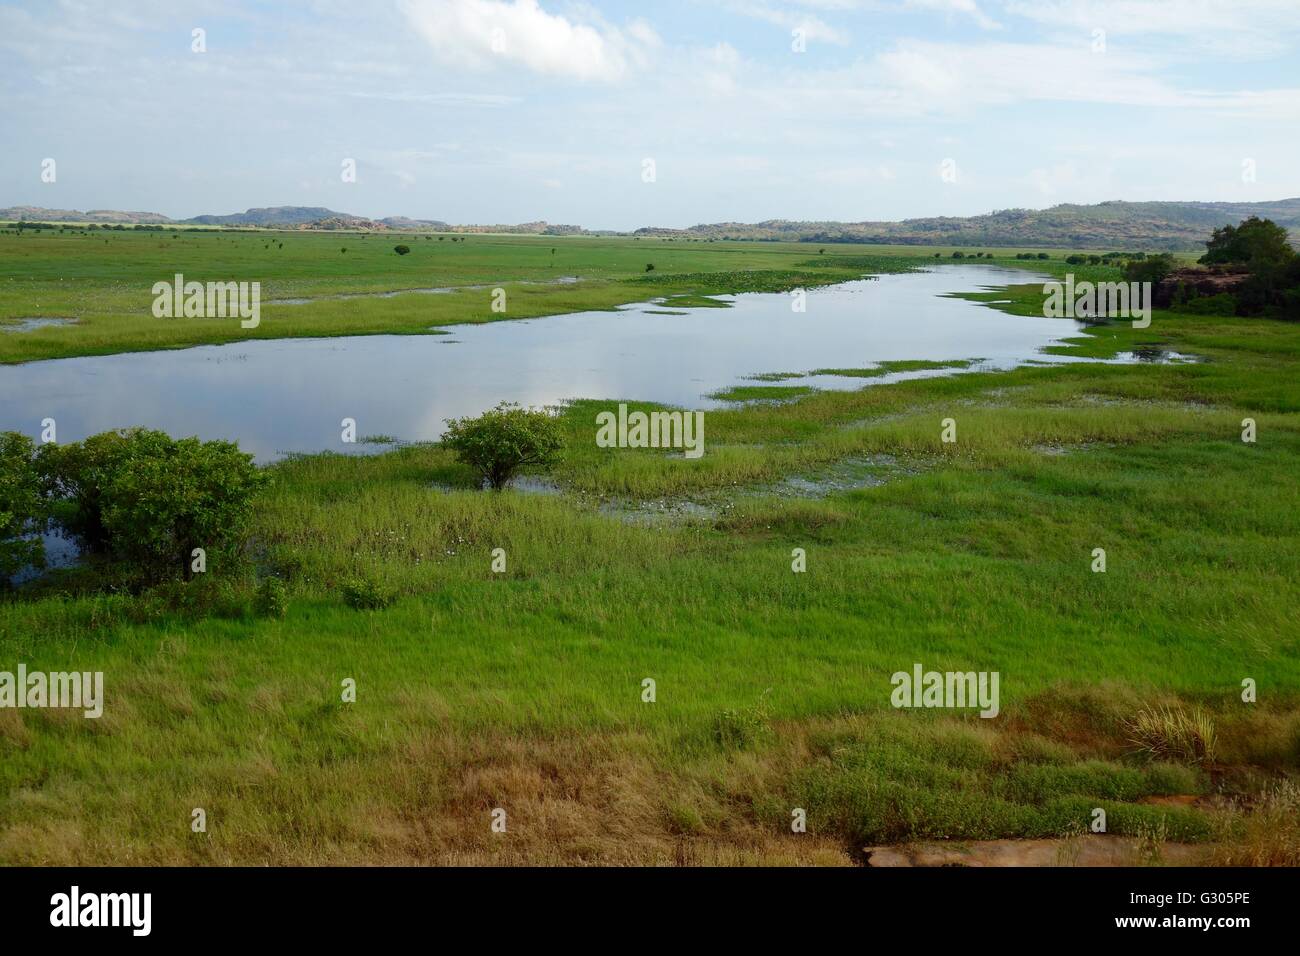 View of the floodplains and wetlands near East Alligator River in West Arnhem Land, Northern Territory, Australia Stock Photo